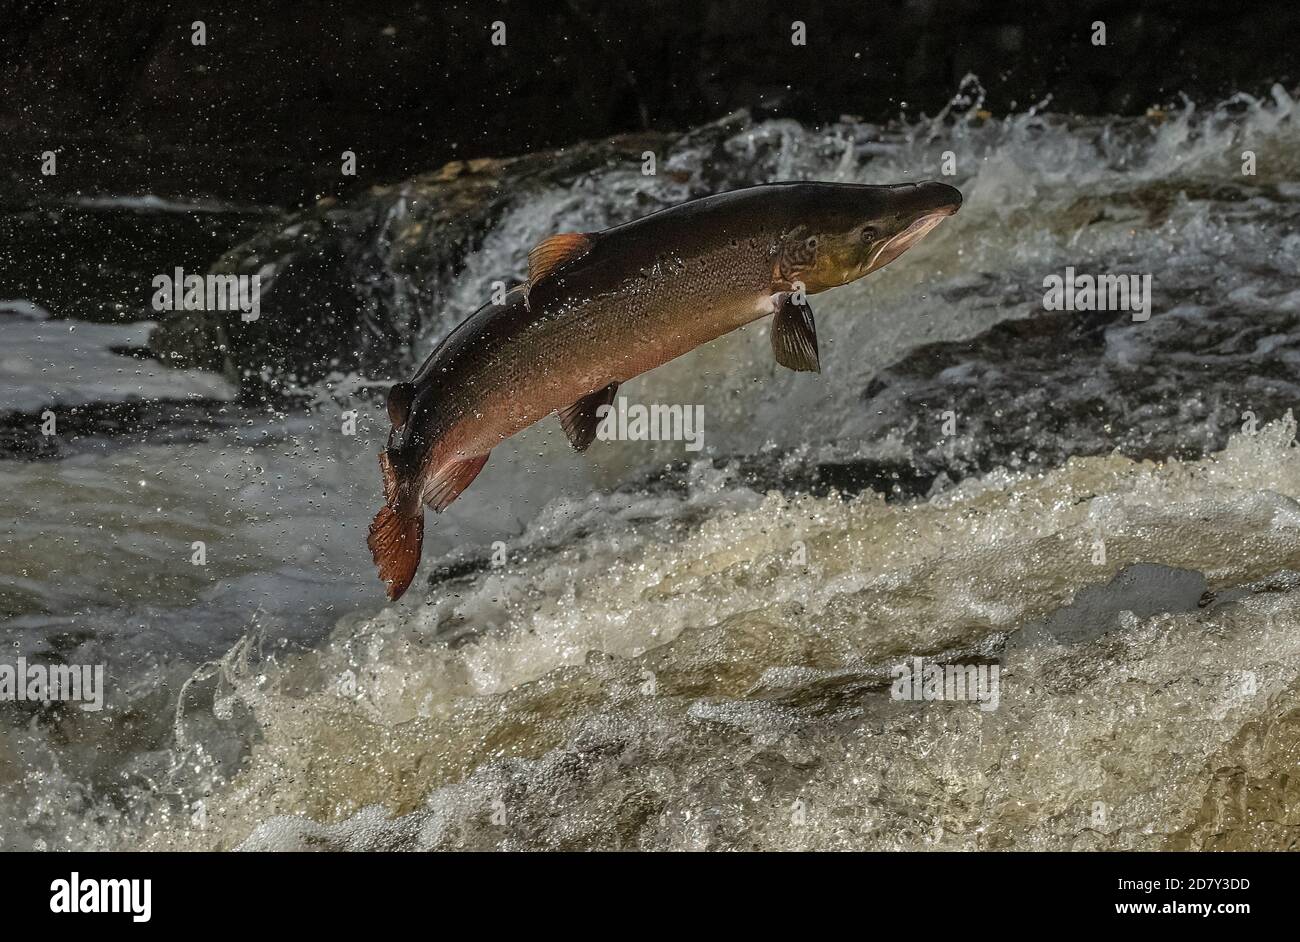 Big old male Atlantic salmon, Salmo salar, migrating up the River Almond, Perth & Kinross, to breed. Stock Photo